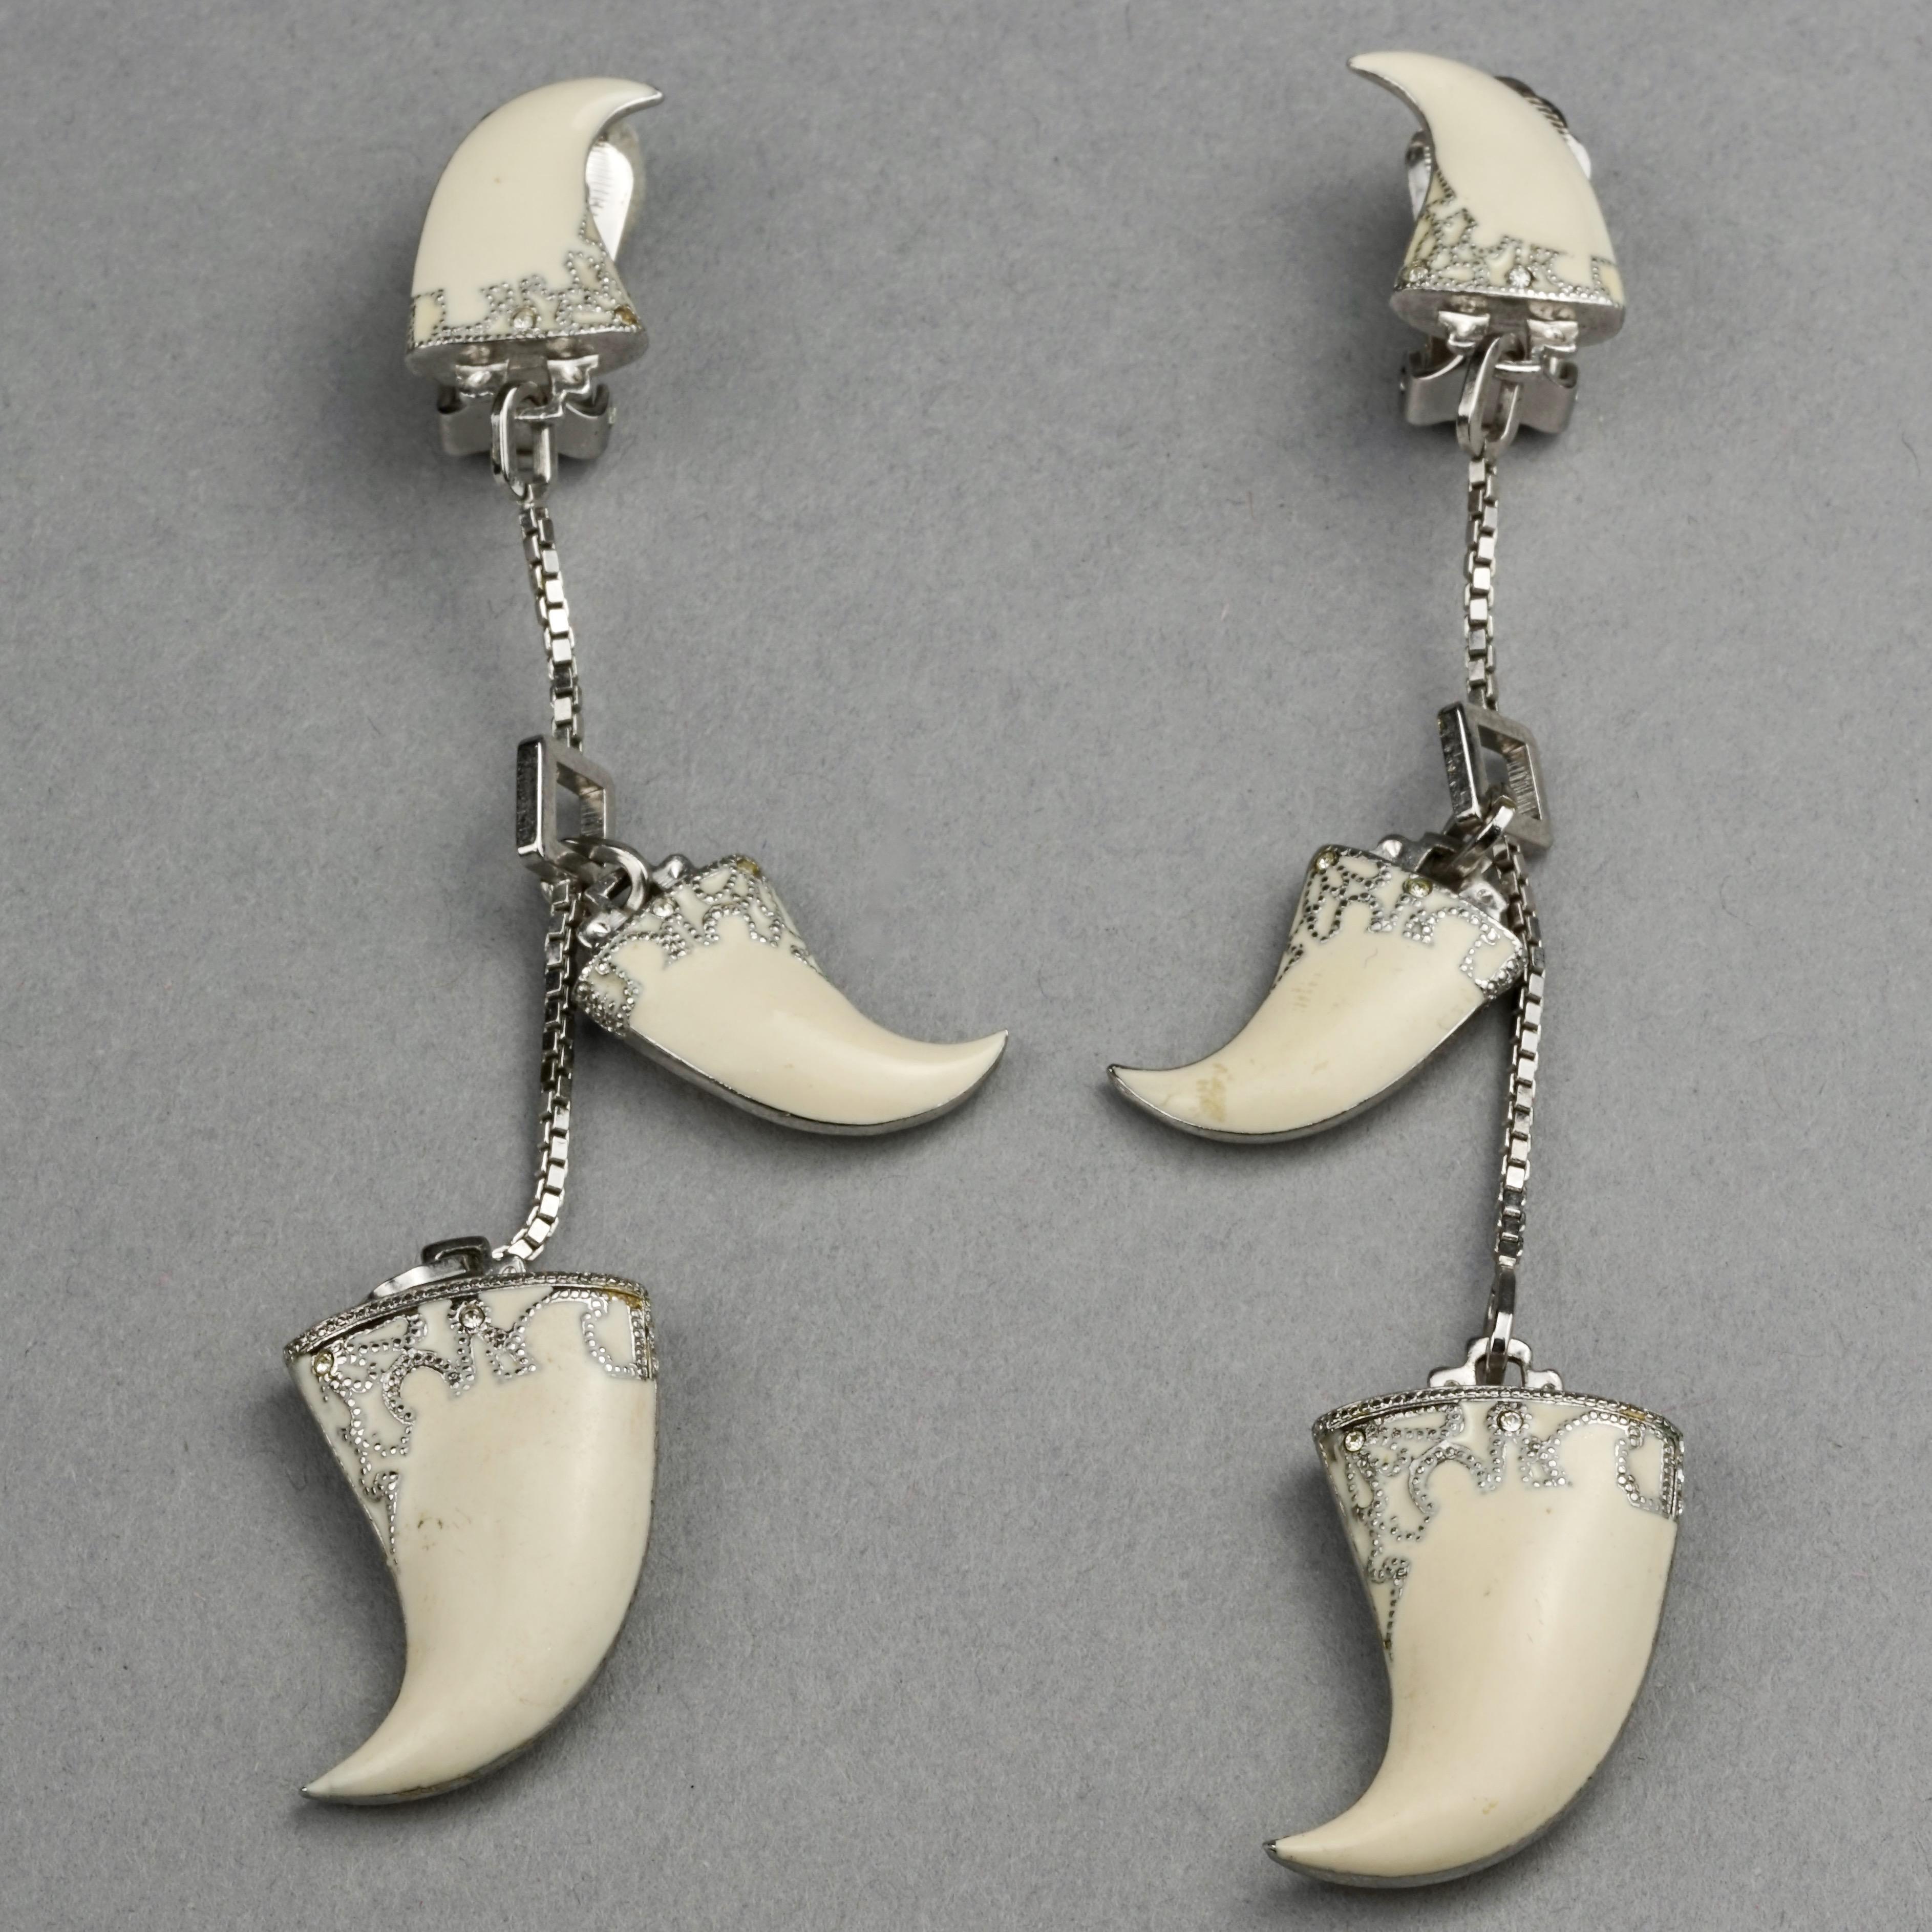 Vintage 2003 CHRISTIAN DIOR CLAW White Enamel Dangling Earrings by Galliano 4